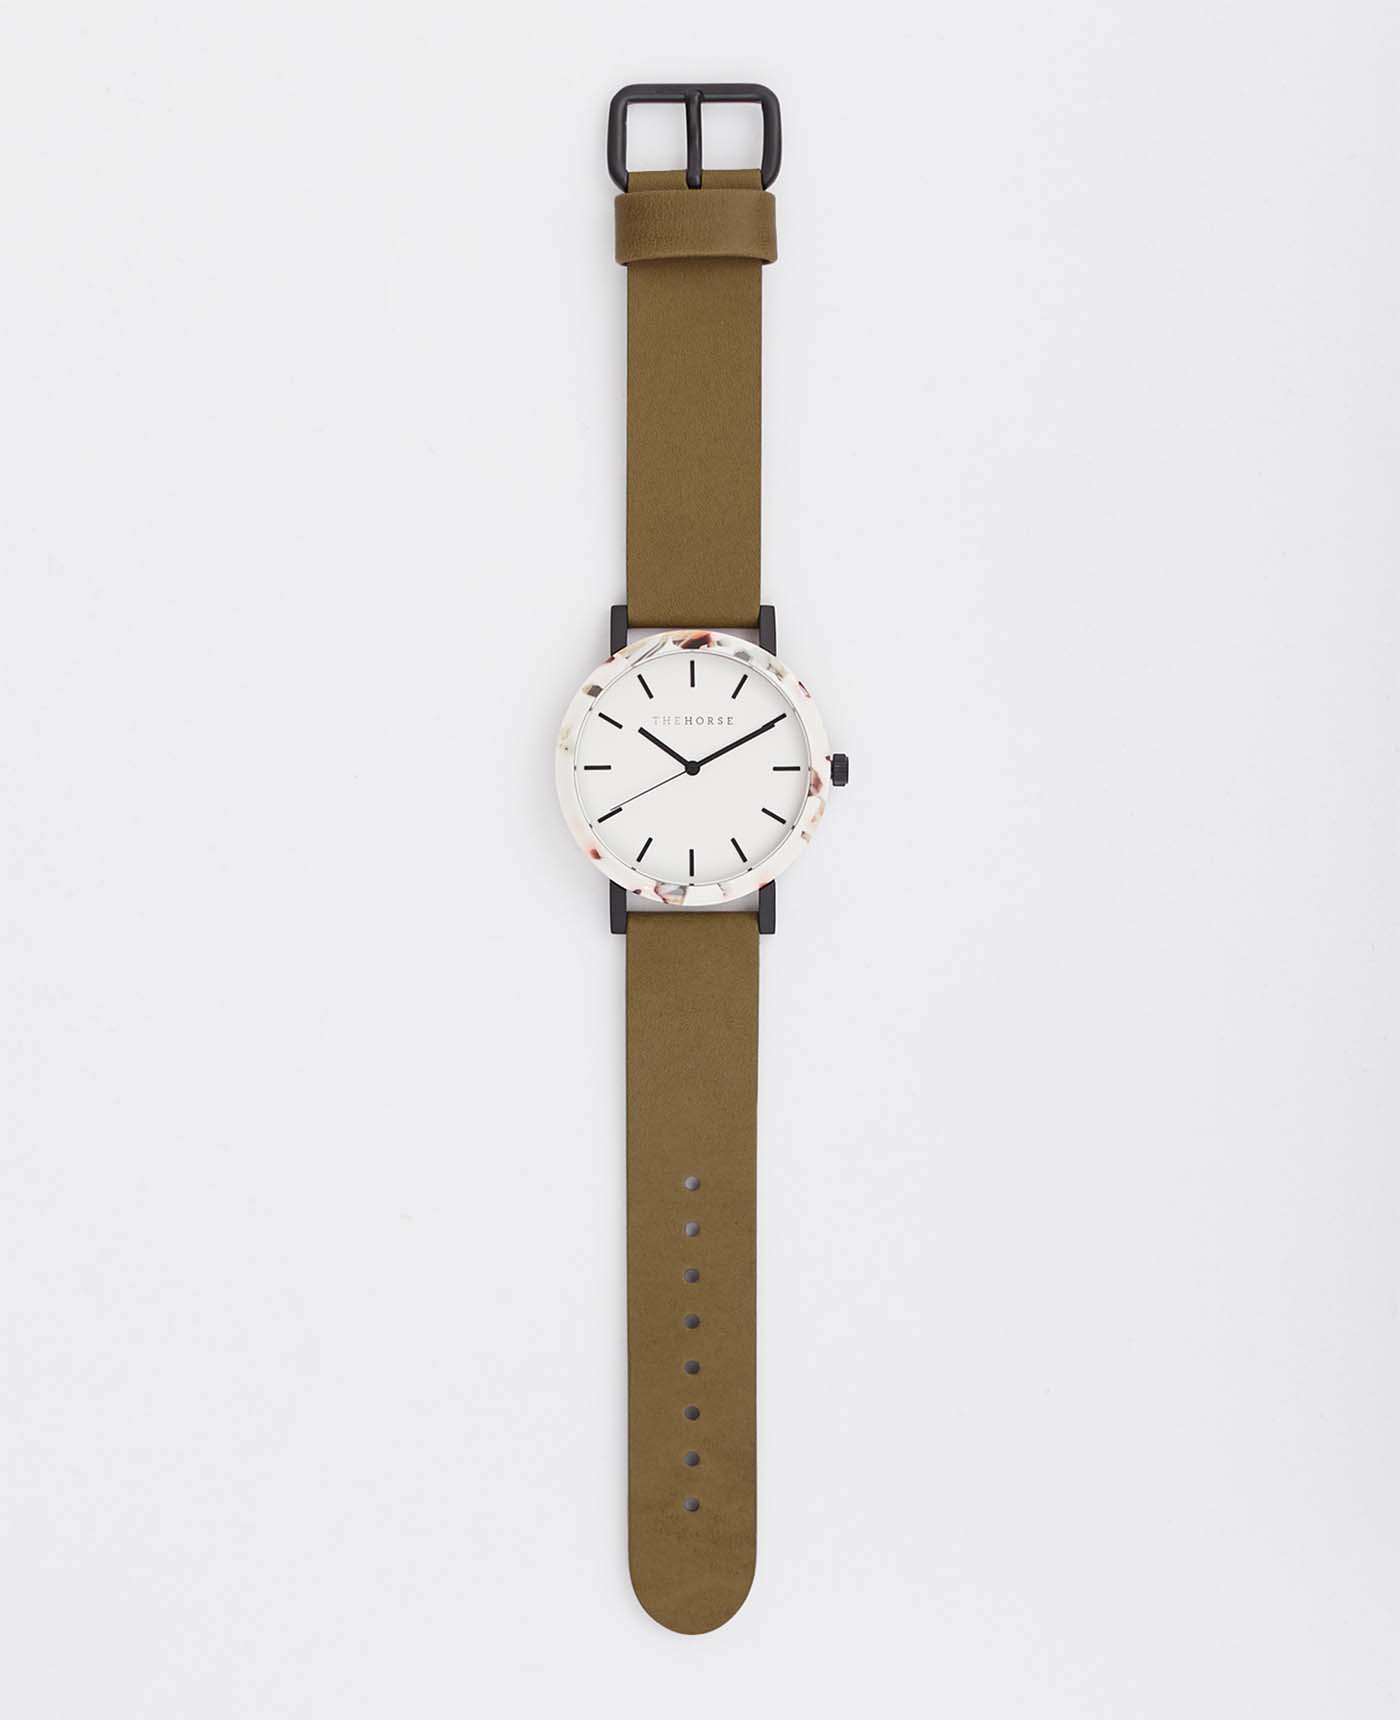 The Resin Women's Watch in Nougat Shell / White Dial / Olive Leather Strap by The Horse